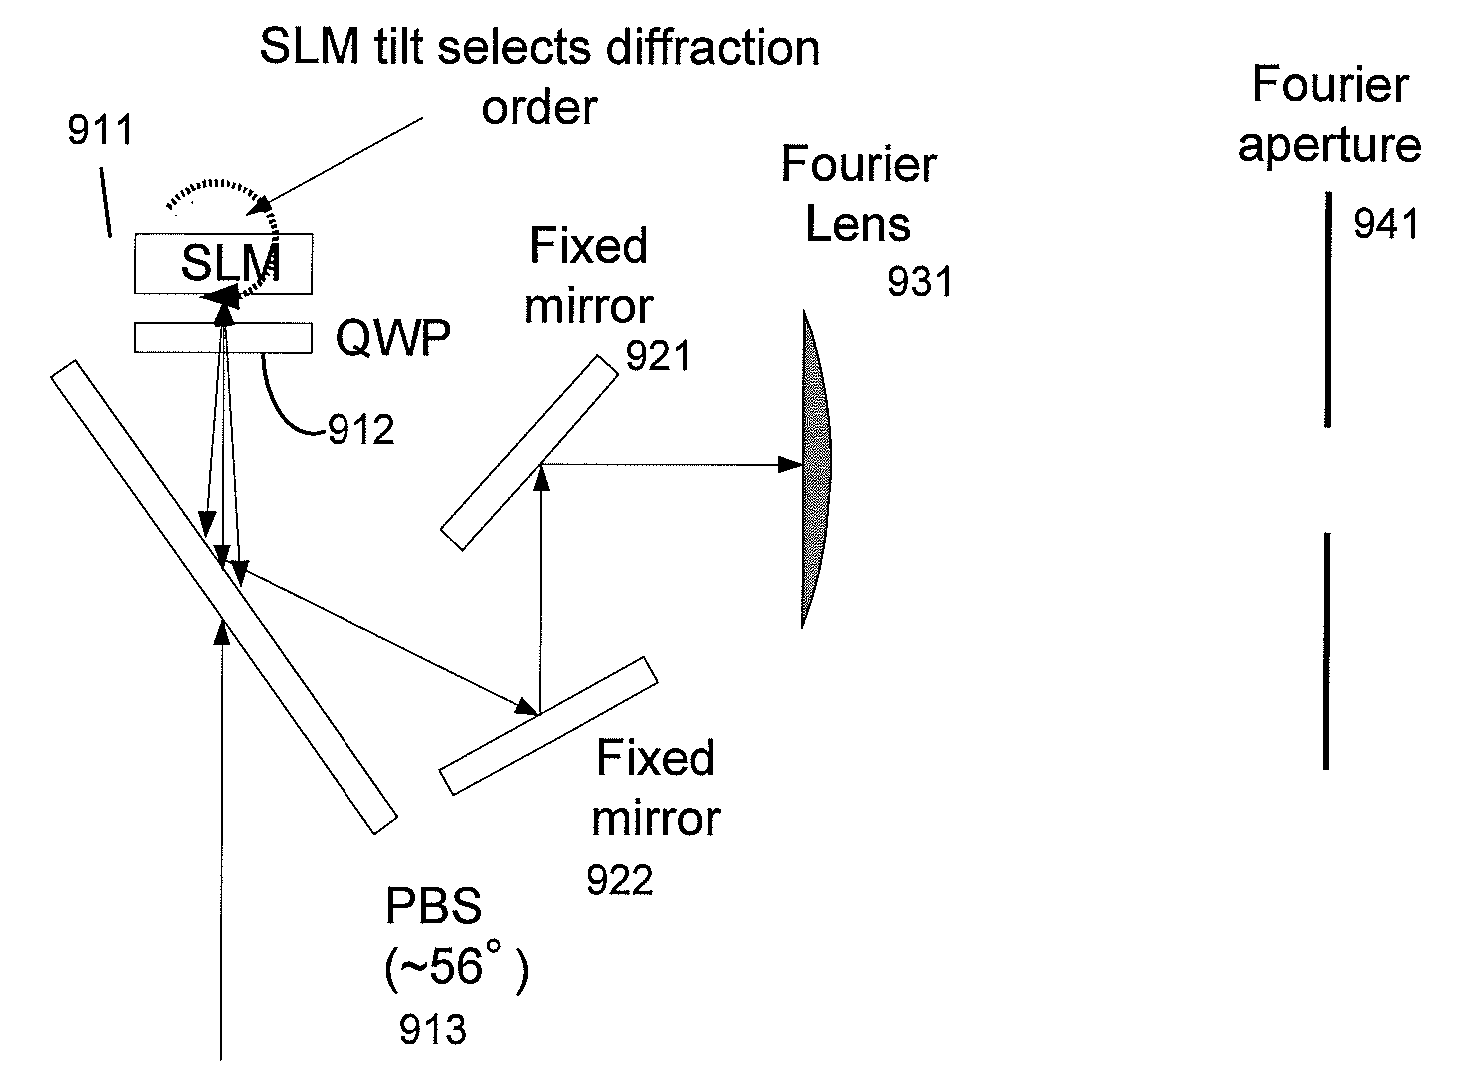 Fourier plane analysis and refinement of slm calibration